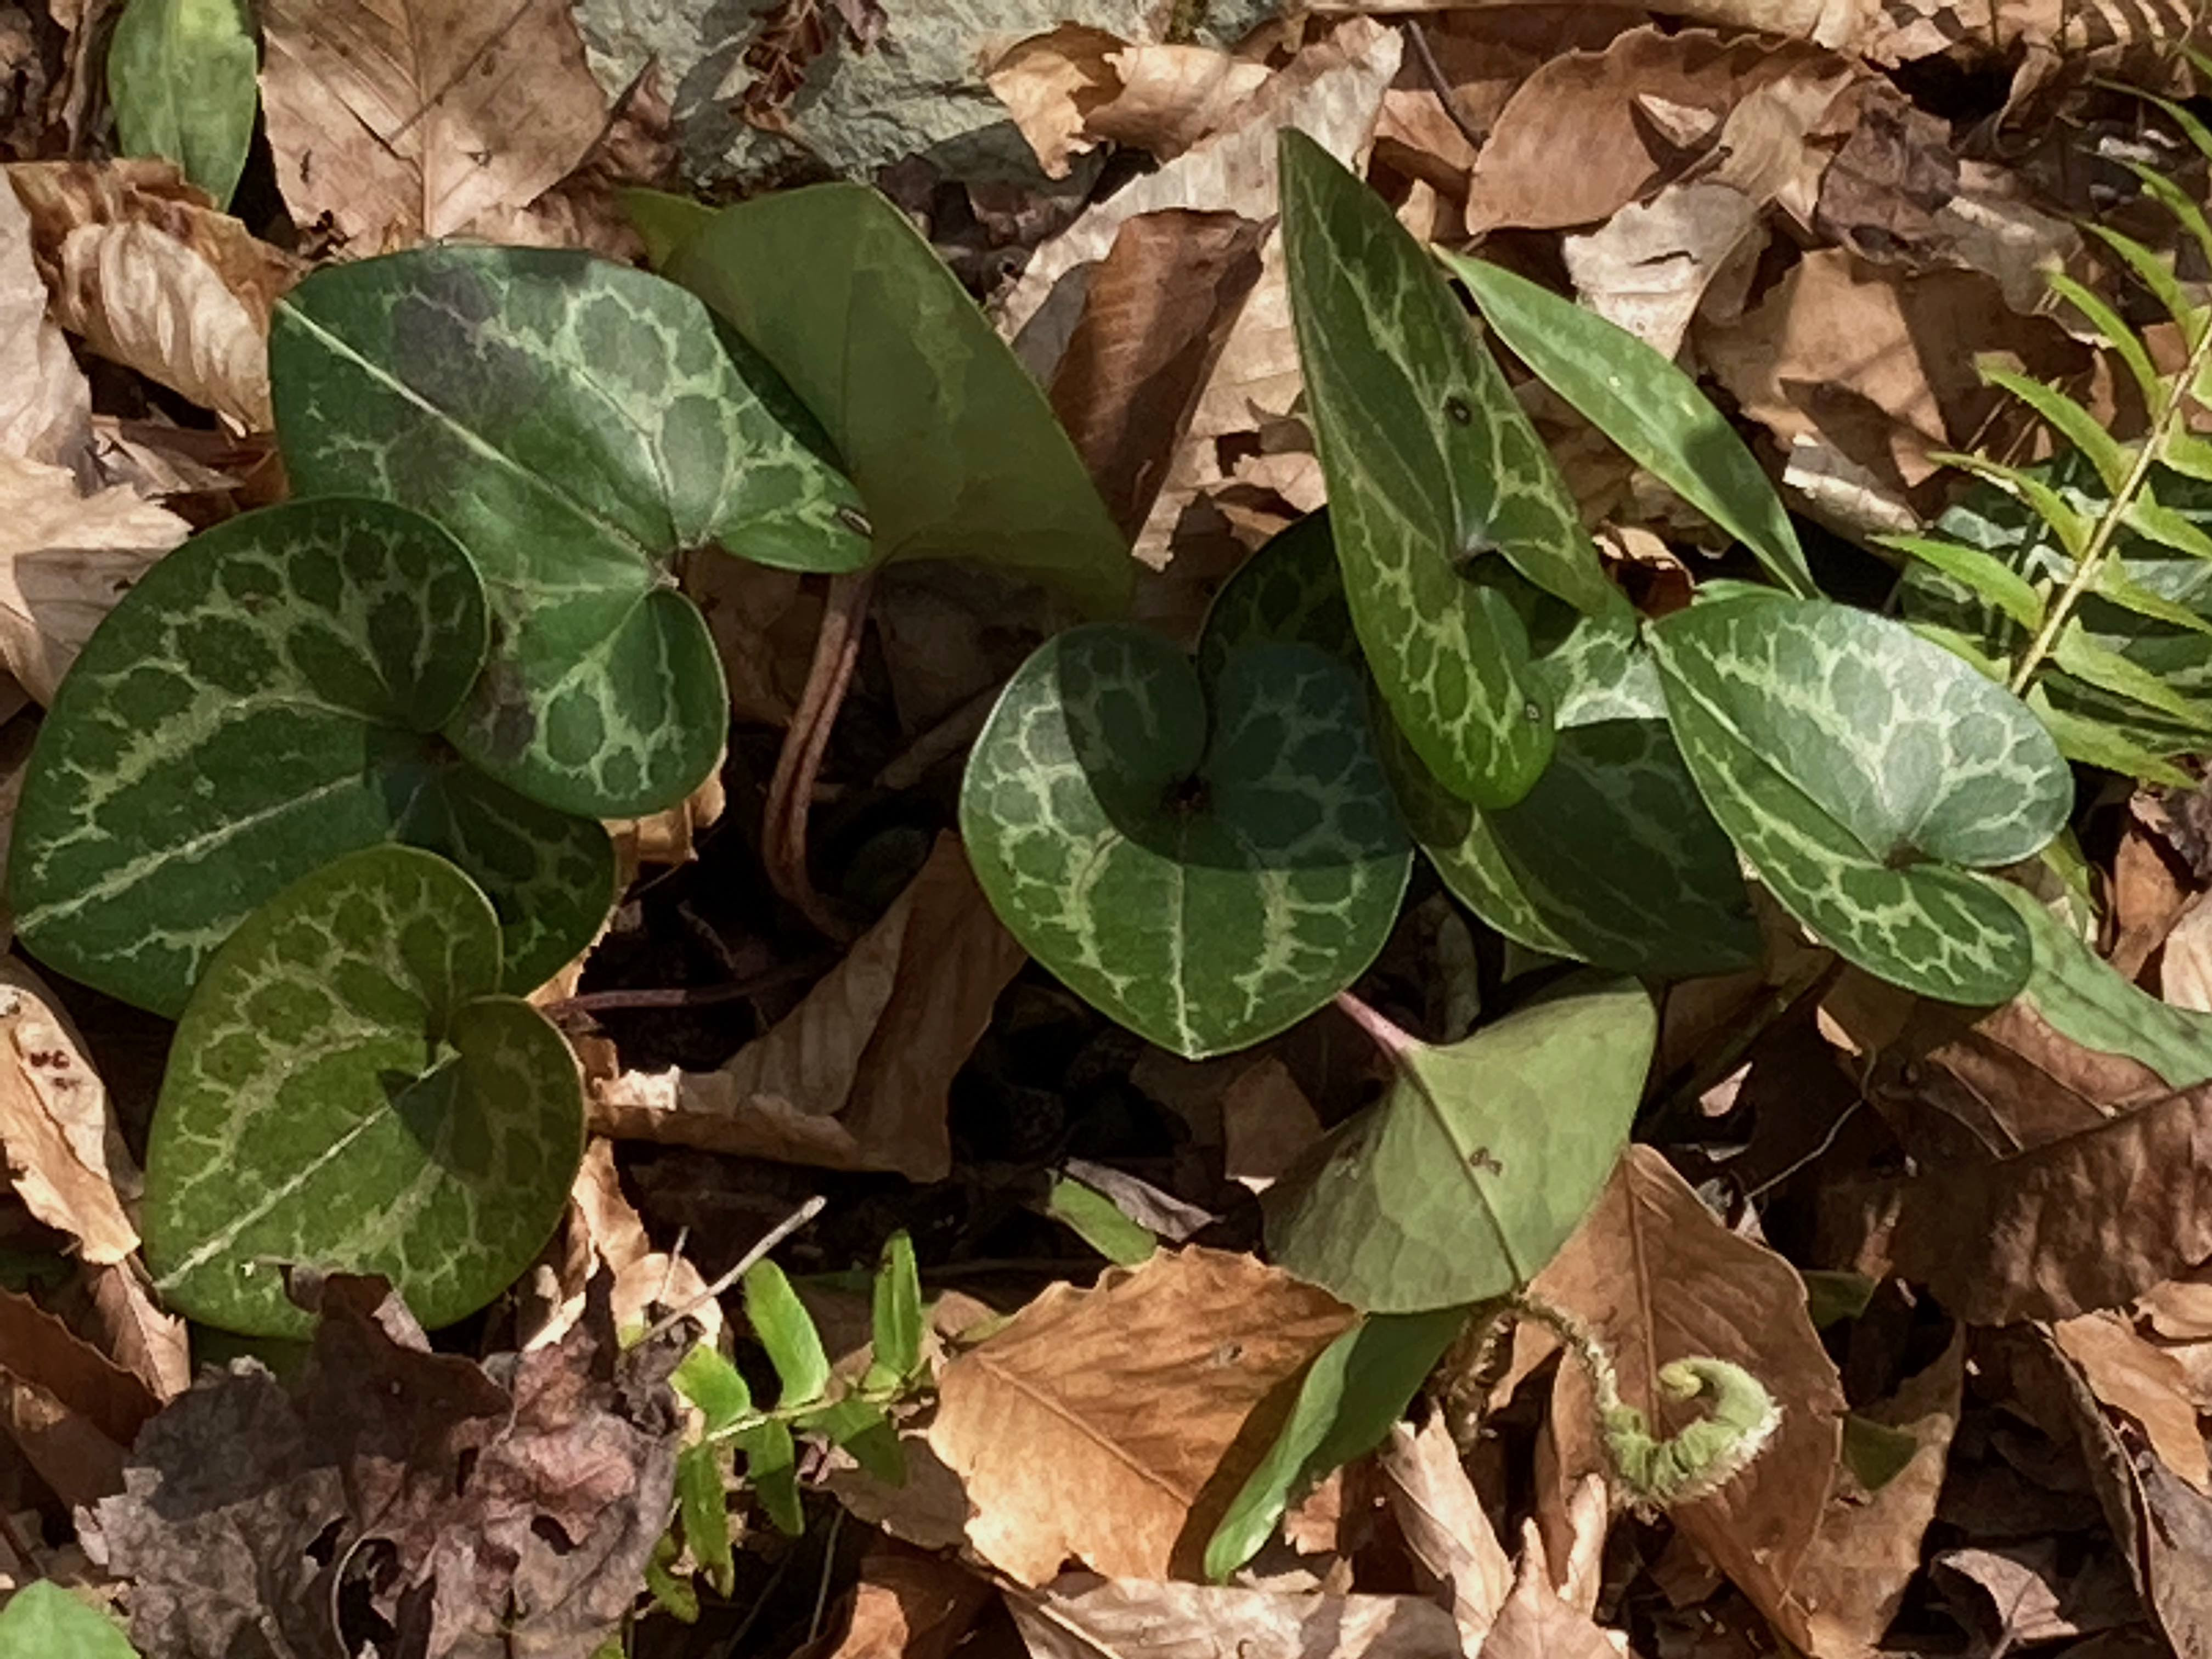 The Scientific Name is Hexastylis minor. You will likely hear them called Little Heartleaf, Little Ginger. This picture shows the Glossy, dark-green, heart-shaped evergreen leaves with white variegation along the veins of Hexastylis minor